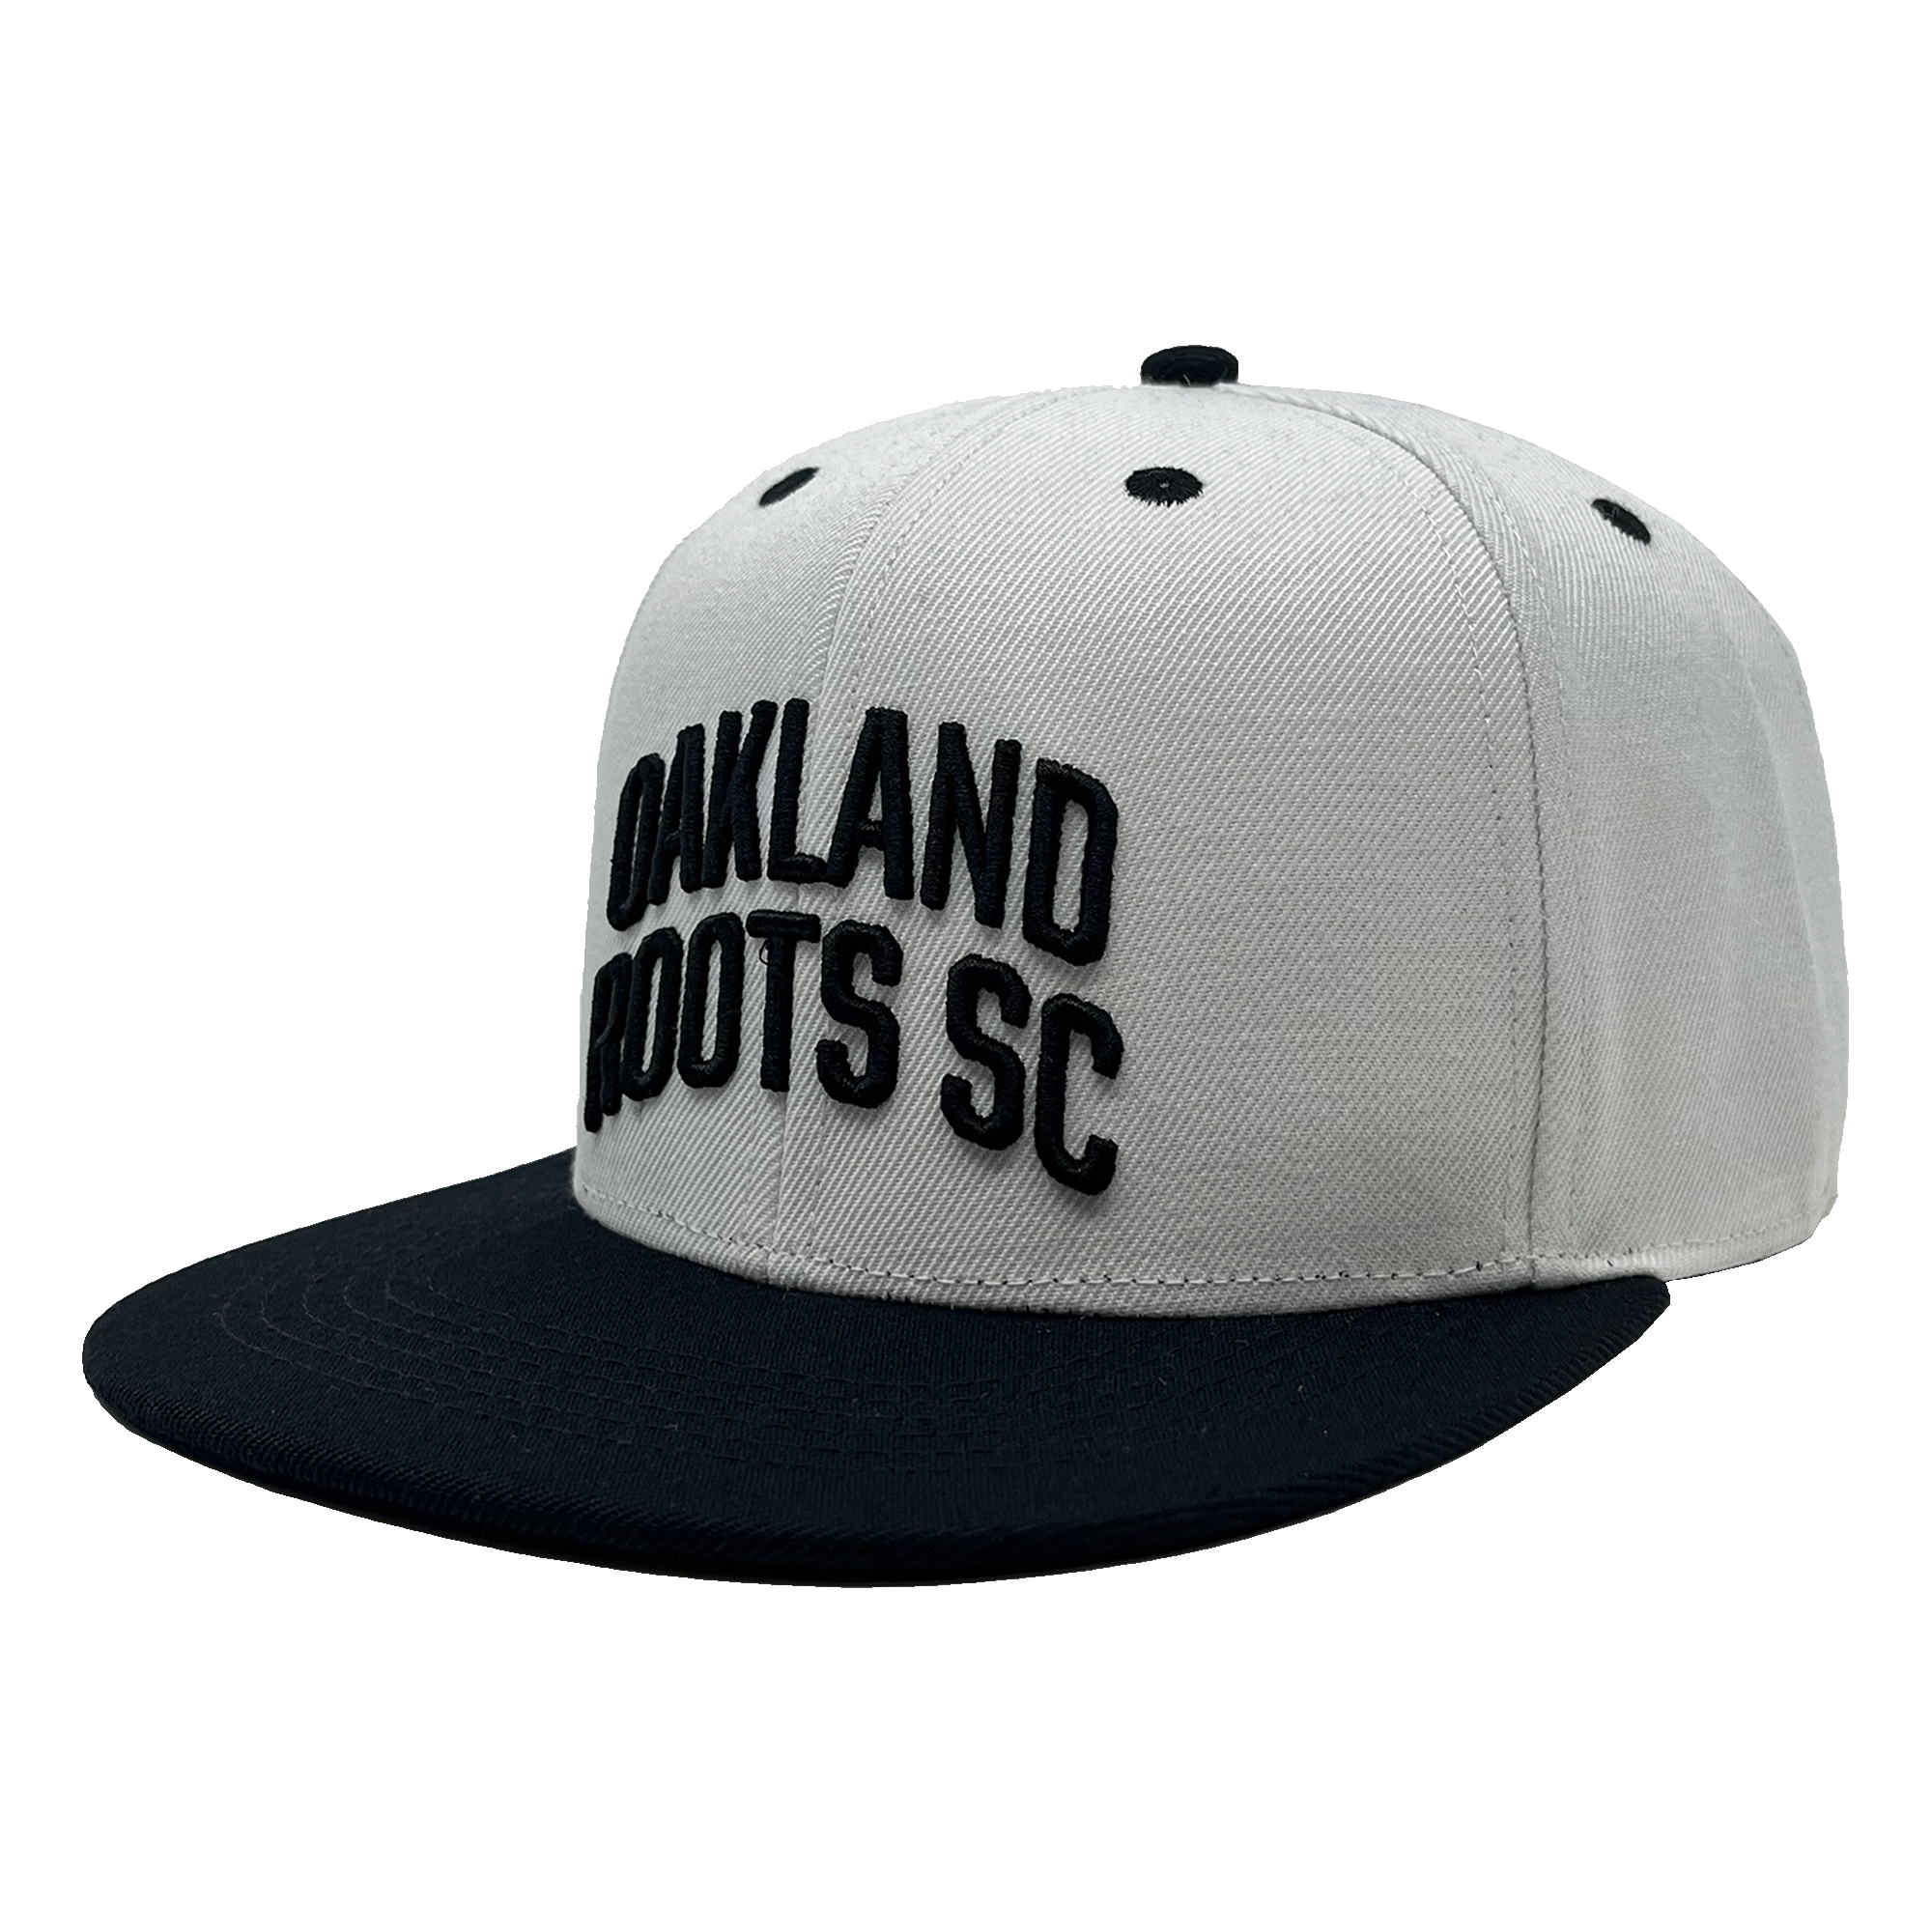  Side view of white snapback hat with black embroidered Oakland Roots SC wordmark on the crown, black flat square bill and black embroidered details.